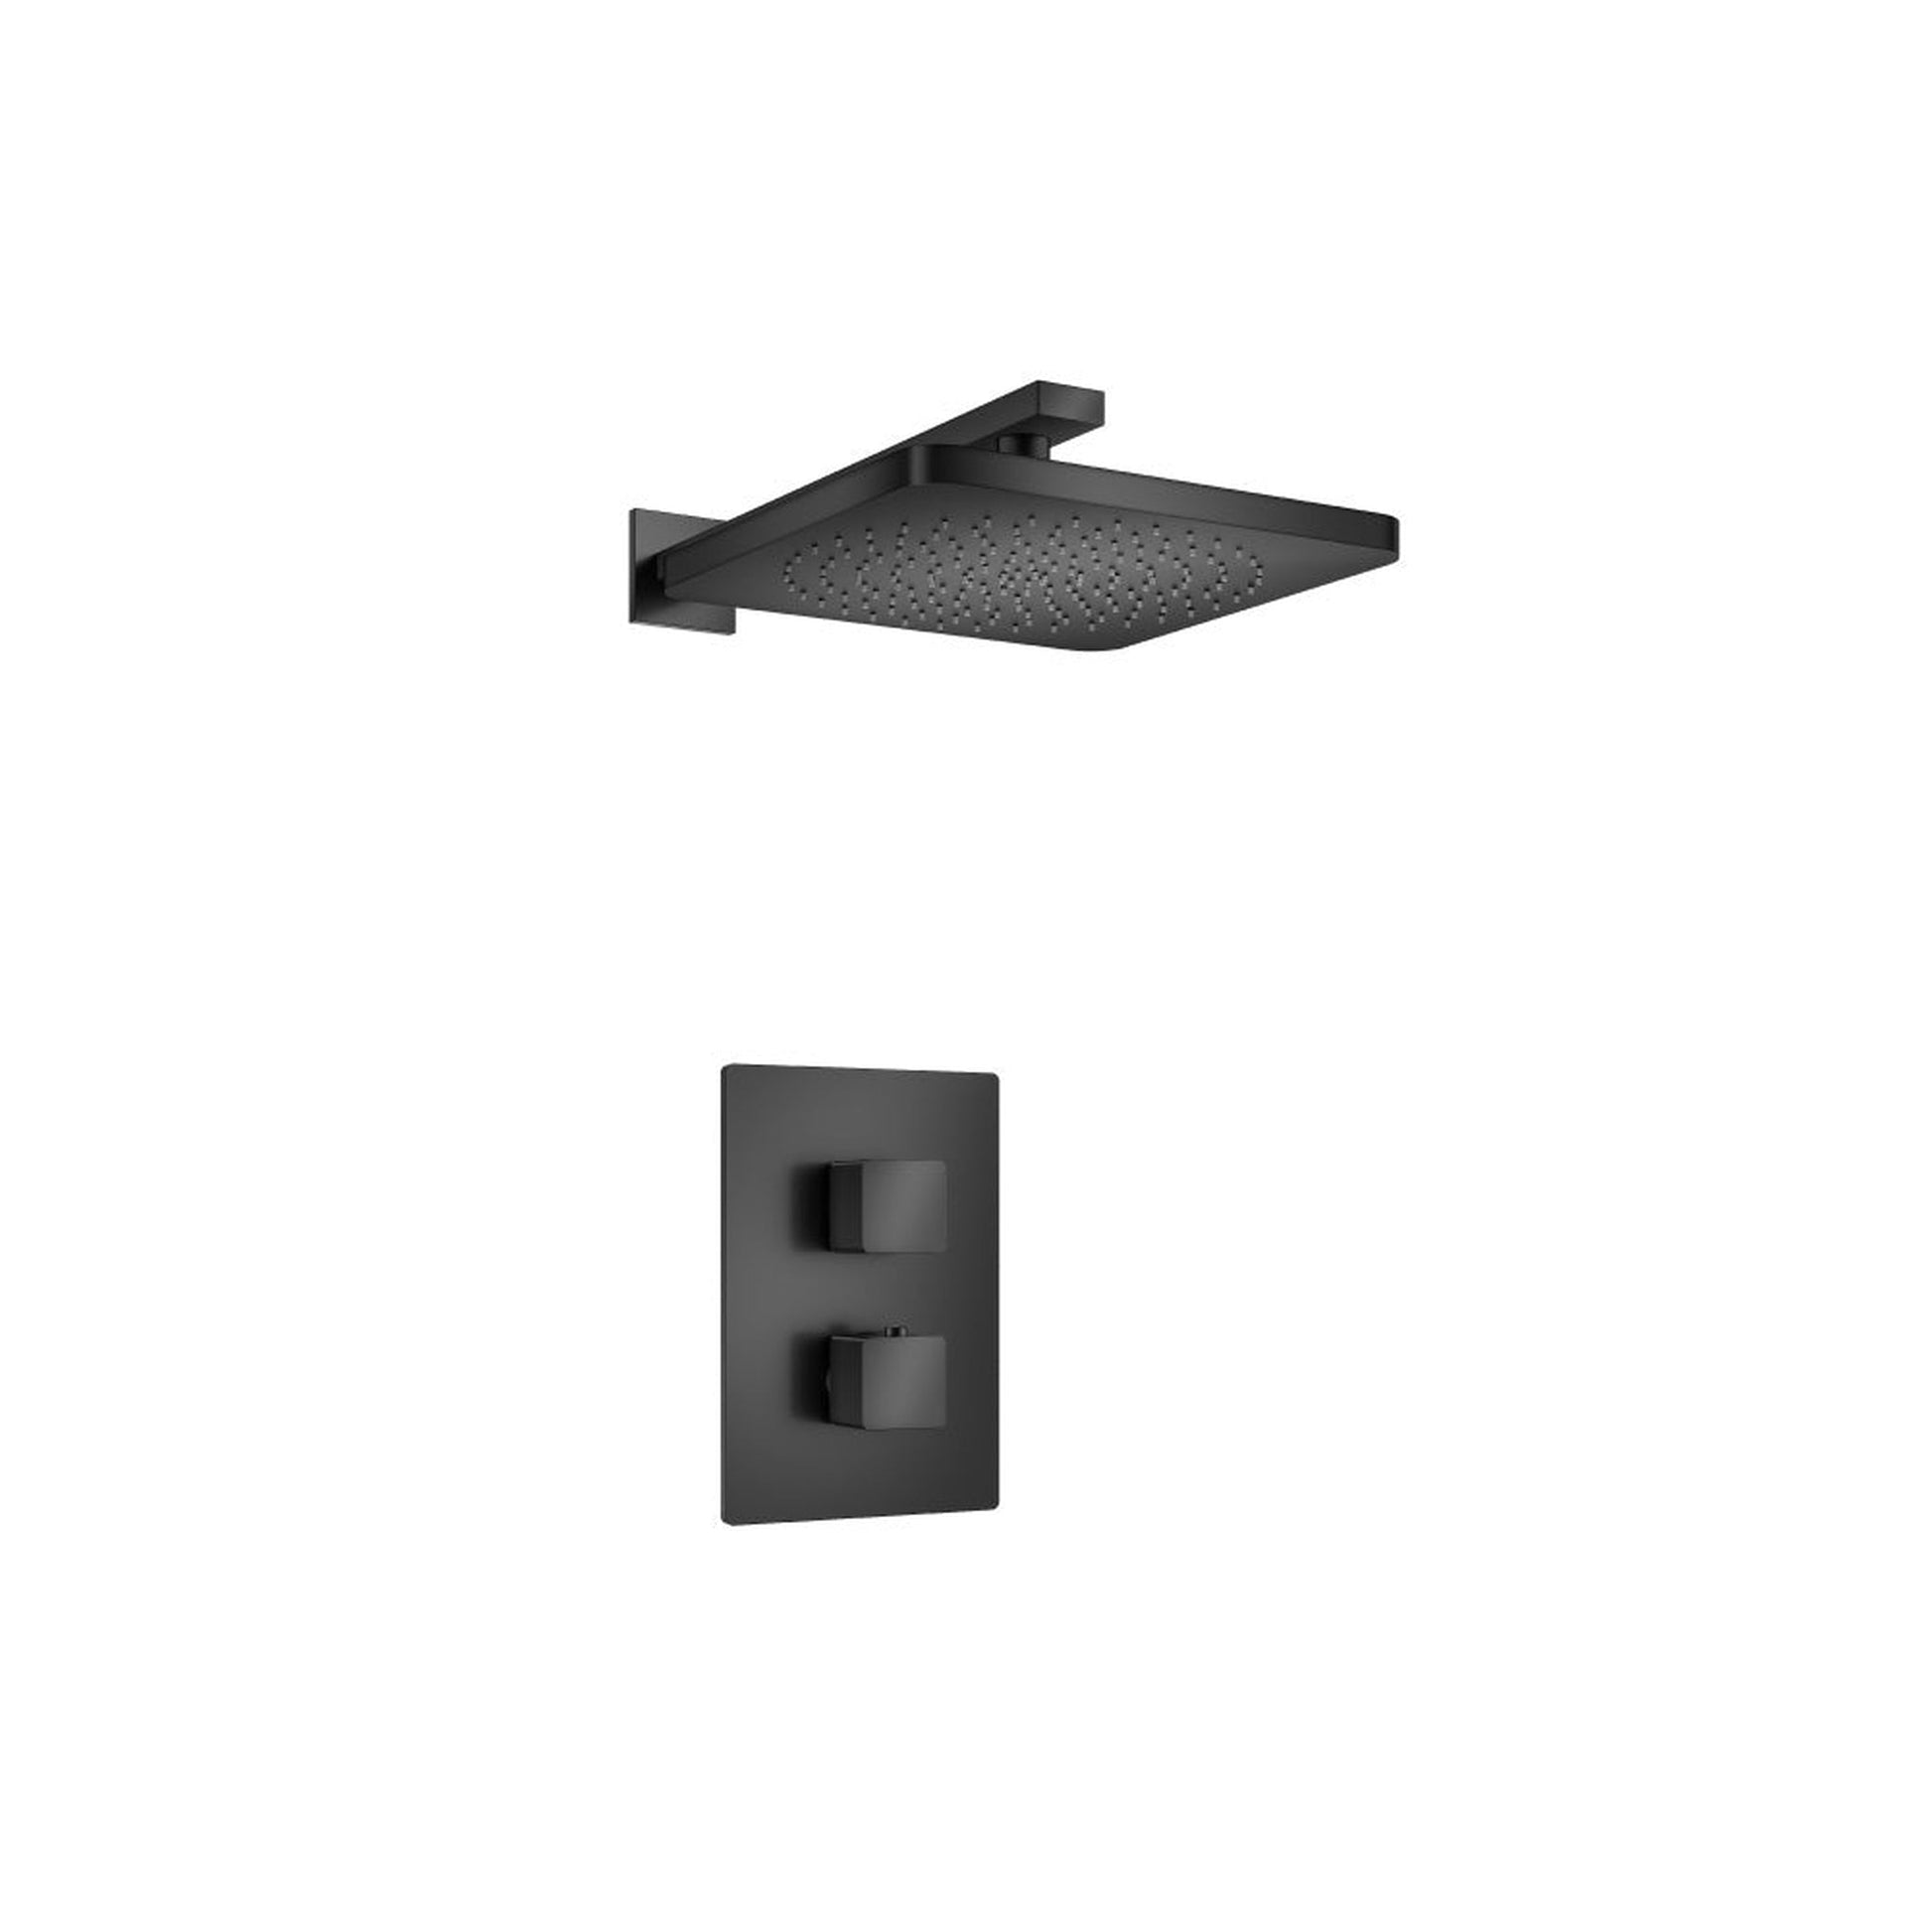 Isenberg Serie 196 Single Matte Black Wall-Mounted Shower Set With Single Function Square Rain Shower Head, Two-Handle Shower Trim and 1-Output Wall-Mounted Thermostatic Shower Valve With Integrated Volume Control